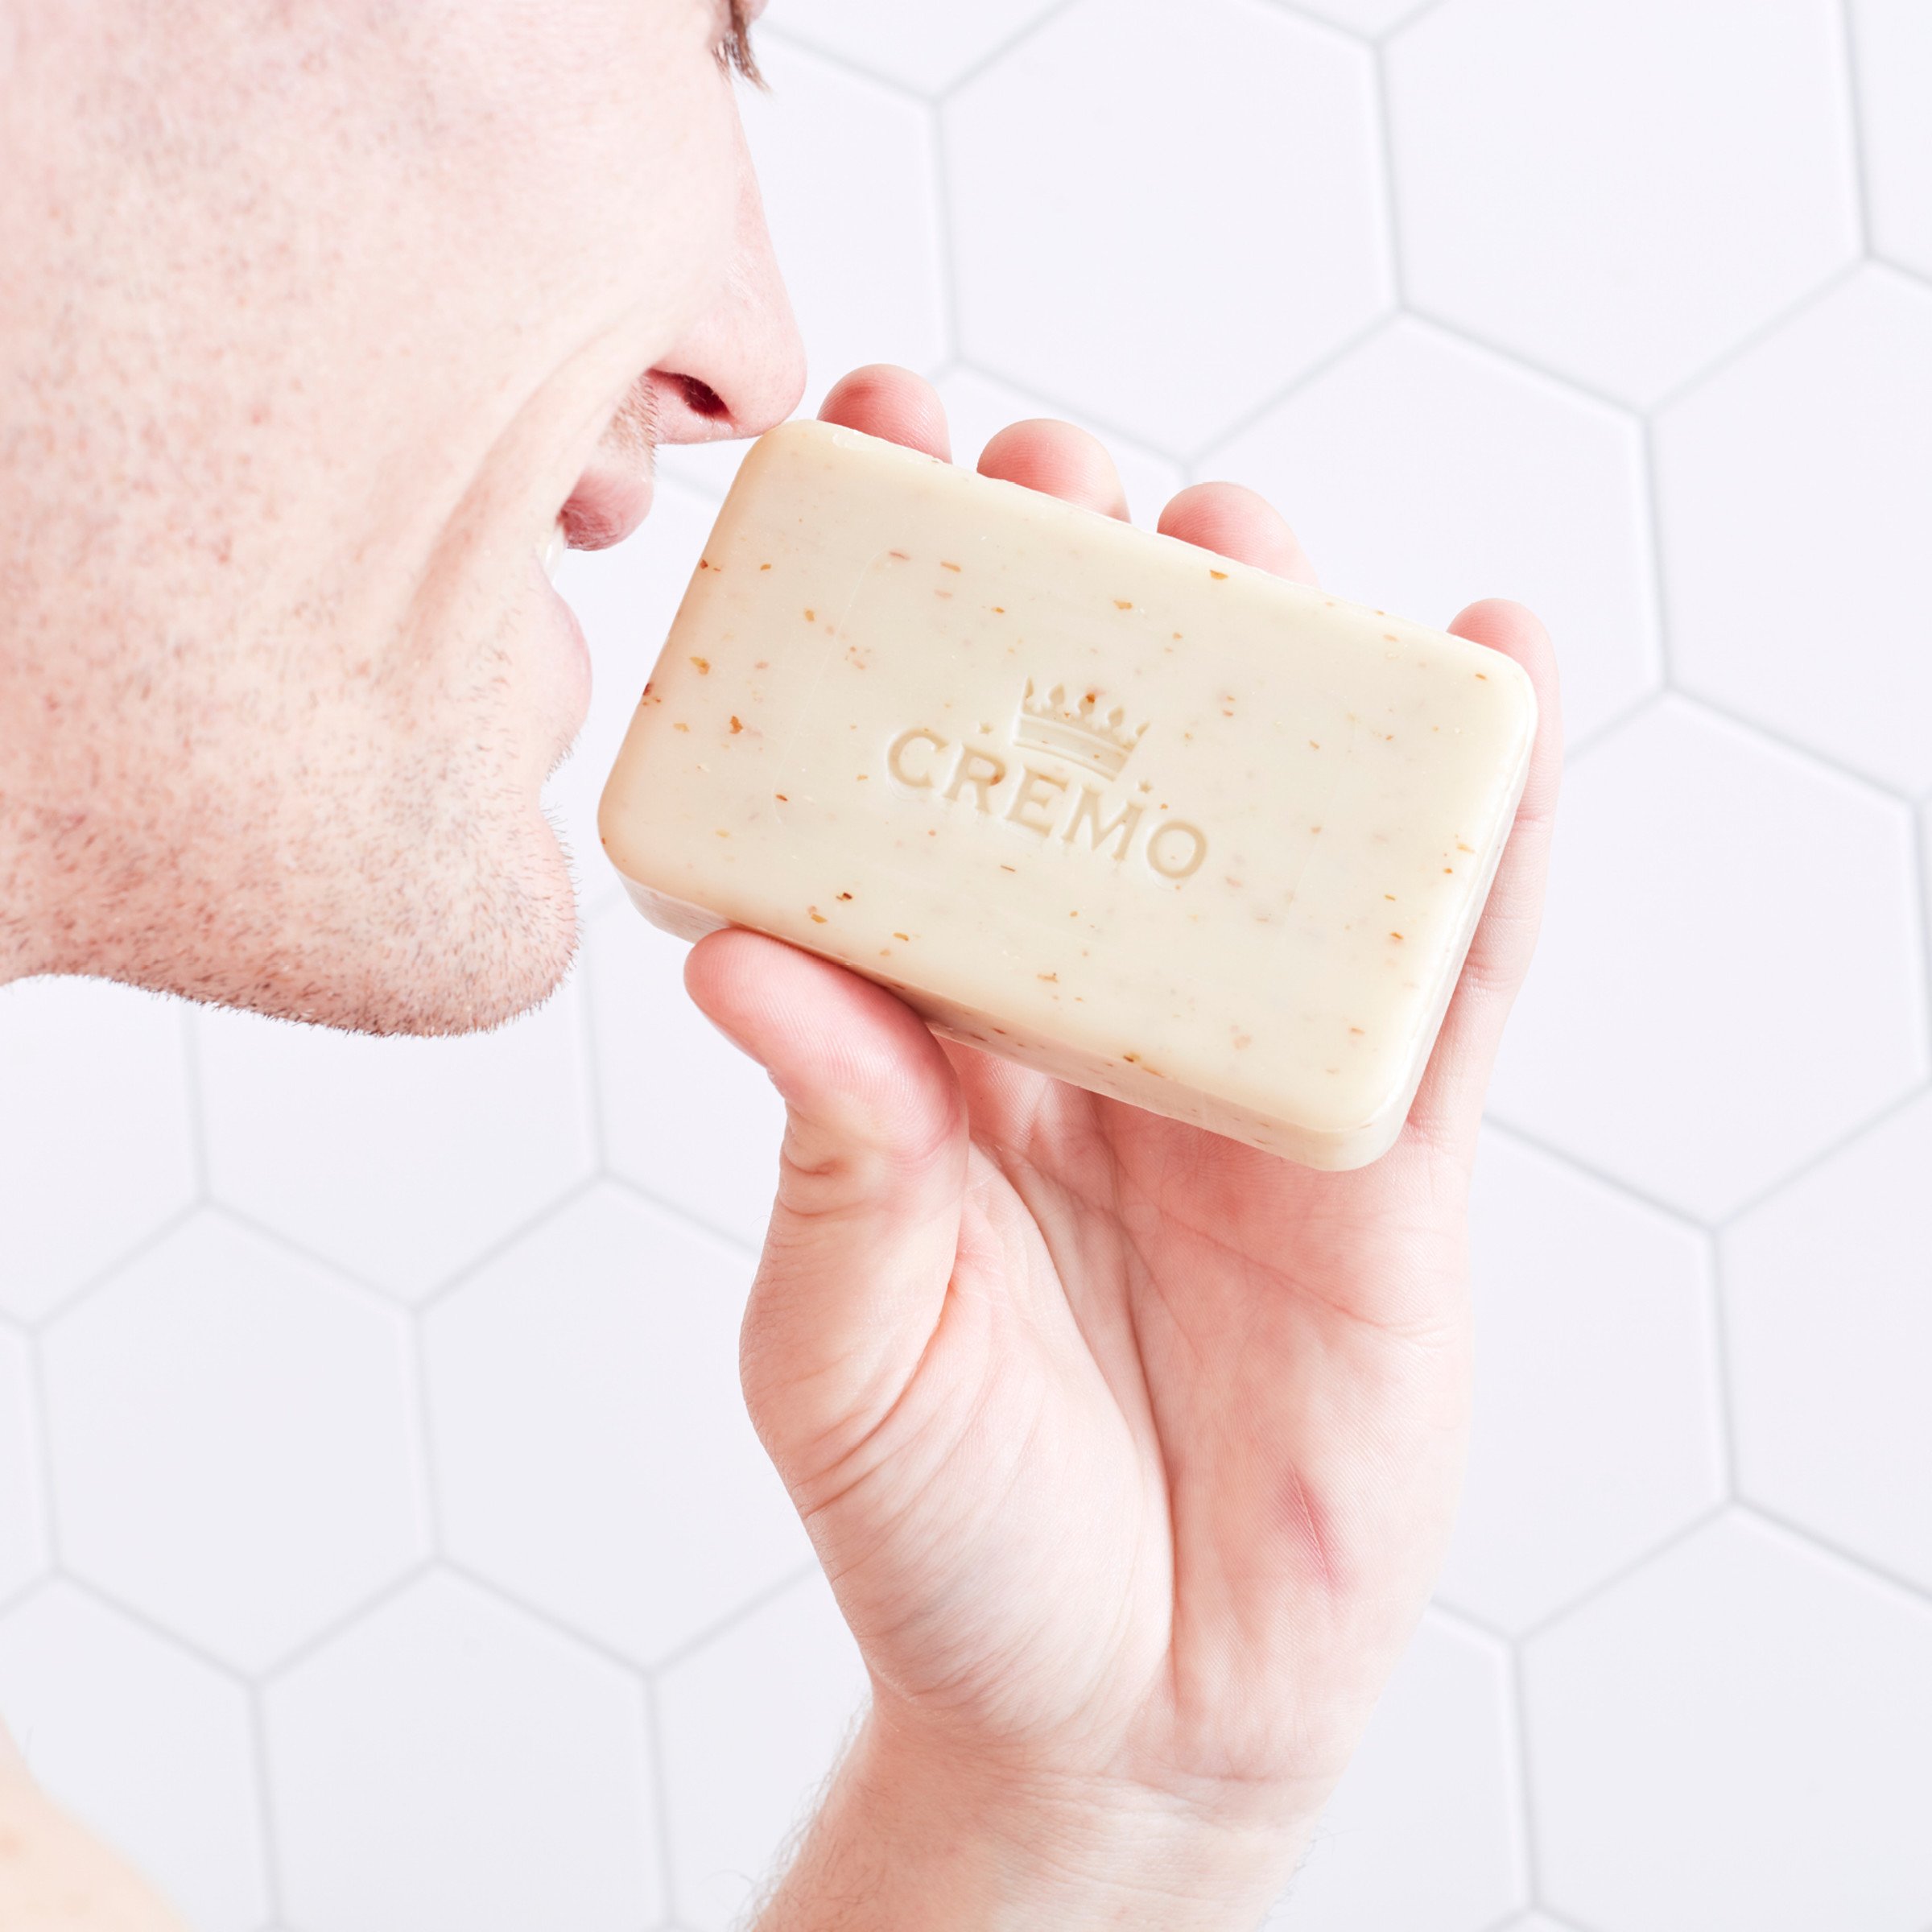 Cremo Exfoliating Body Bars Distiller's Blend (Reserve Collection) - A Combination of Lava Rock and Oat Kernel Gently Polishes While Shea Butter